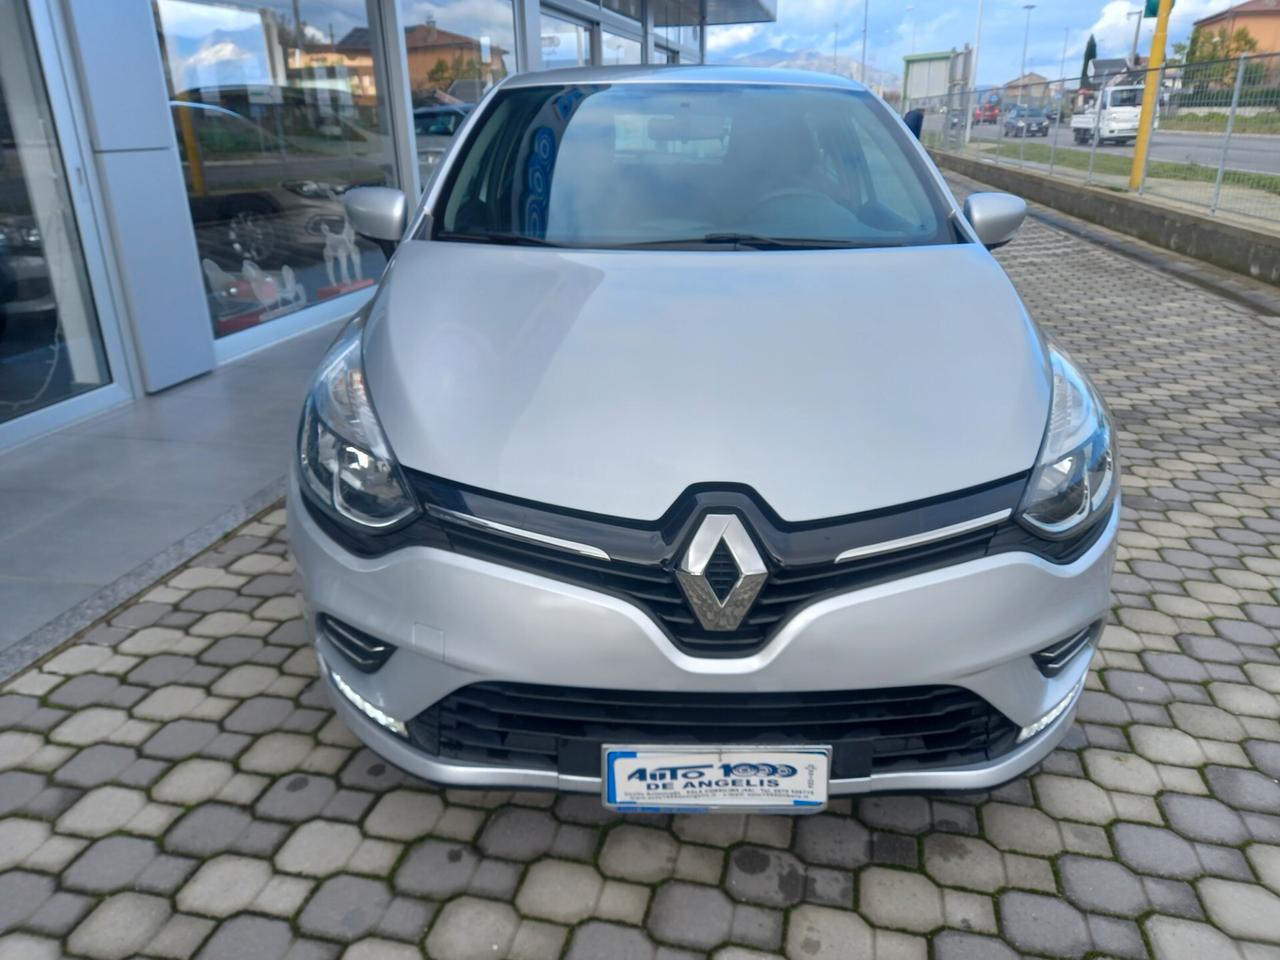 Renault Clio RESTYLING 1.5 dCi 75CV 5P *EURO 6B* FULL OPTIONALS